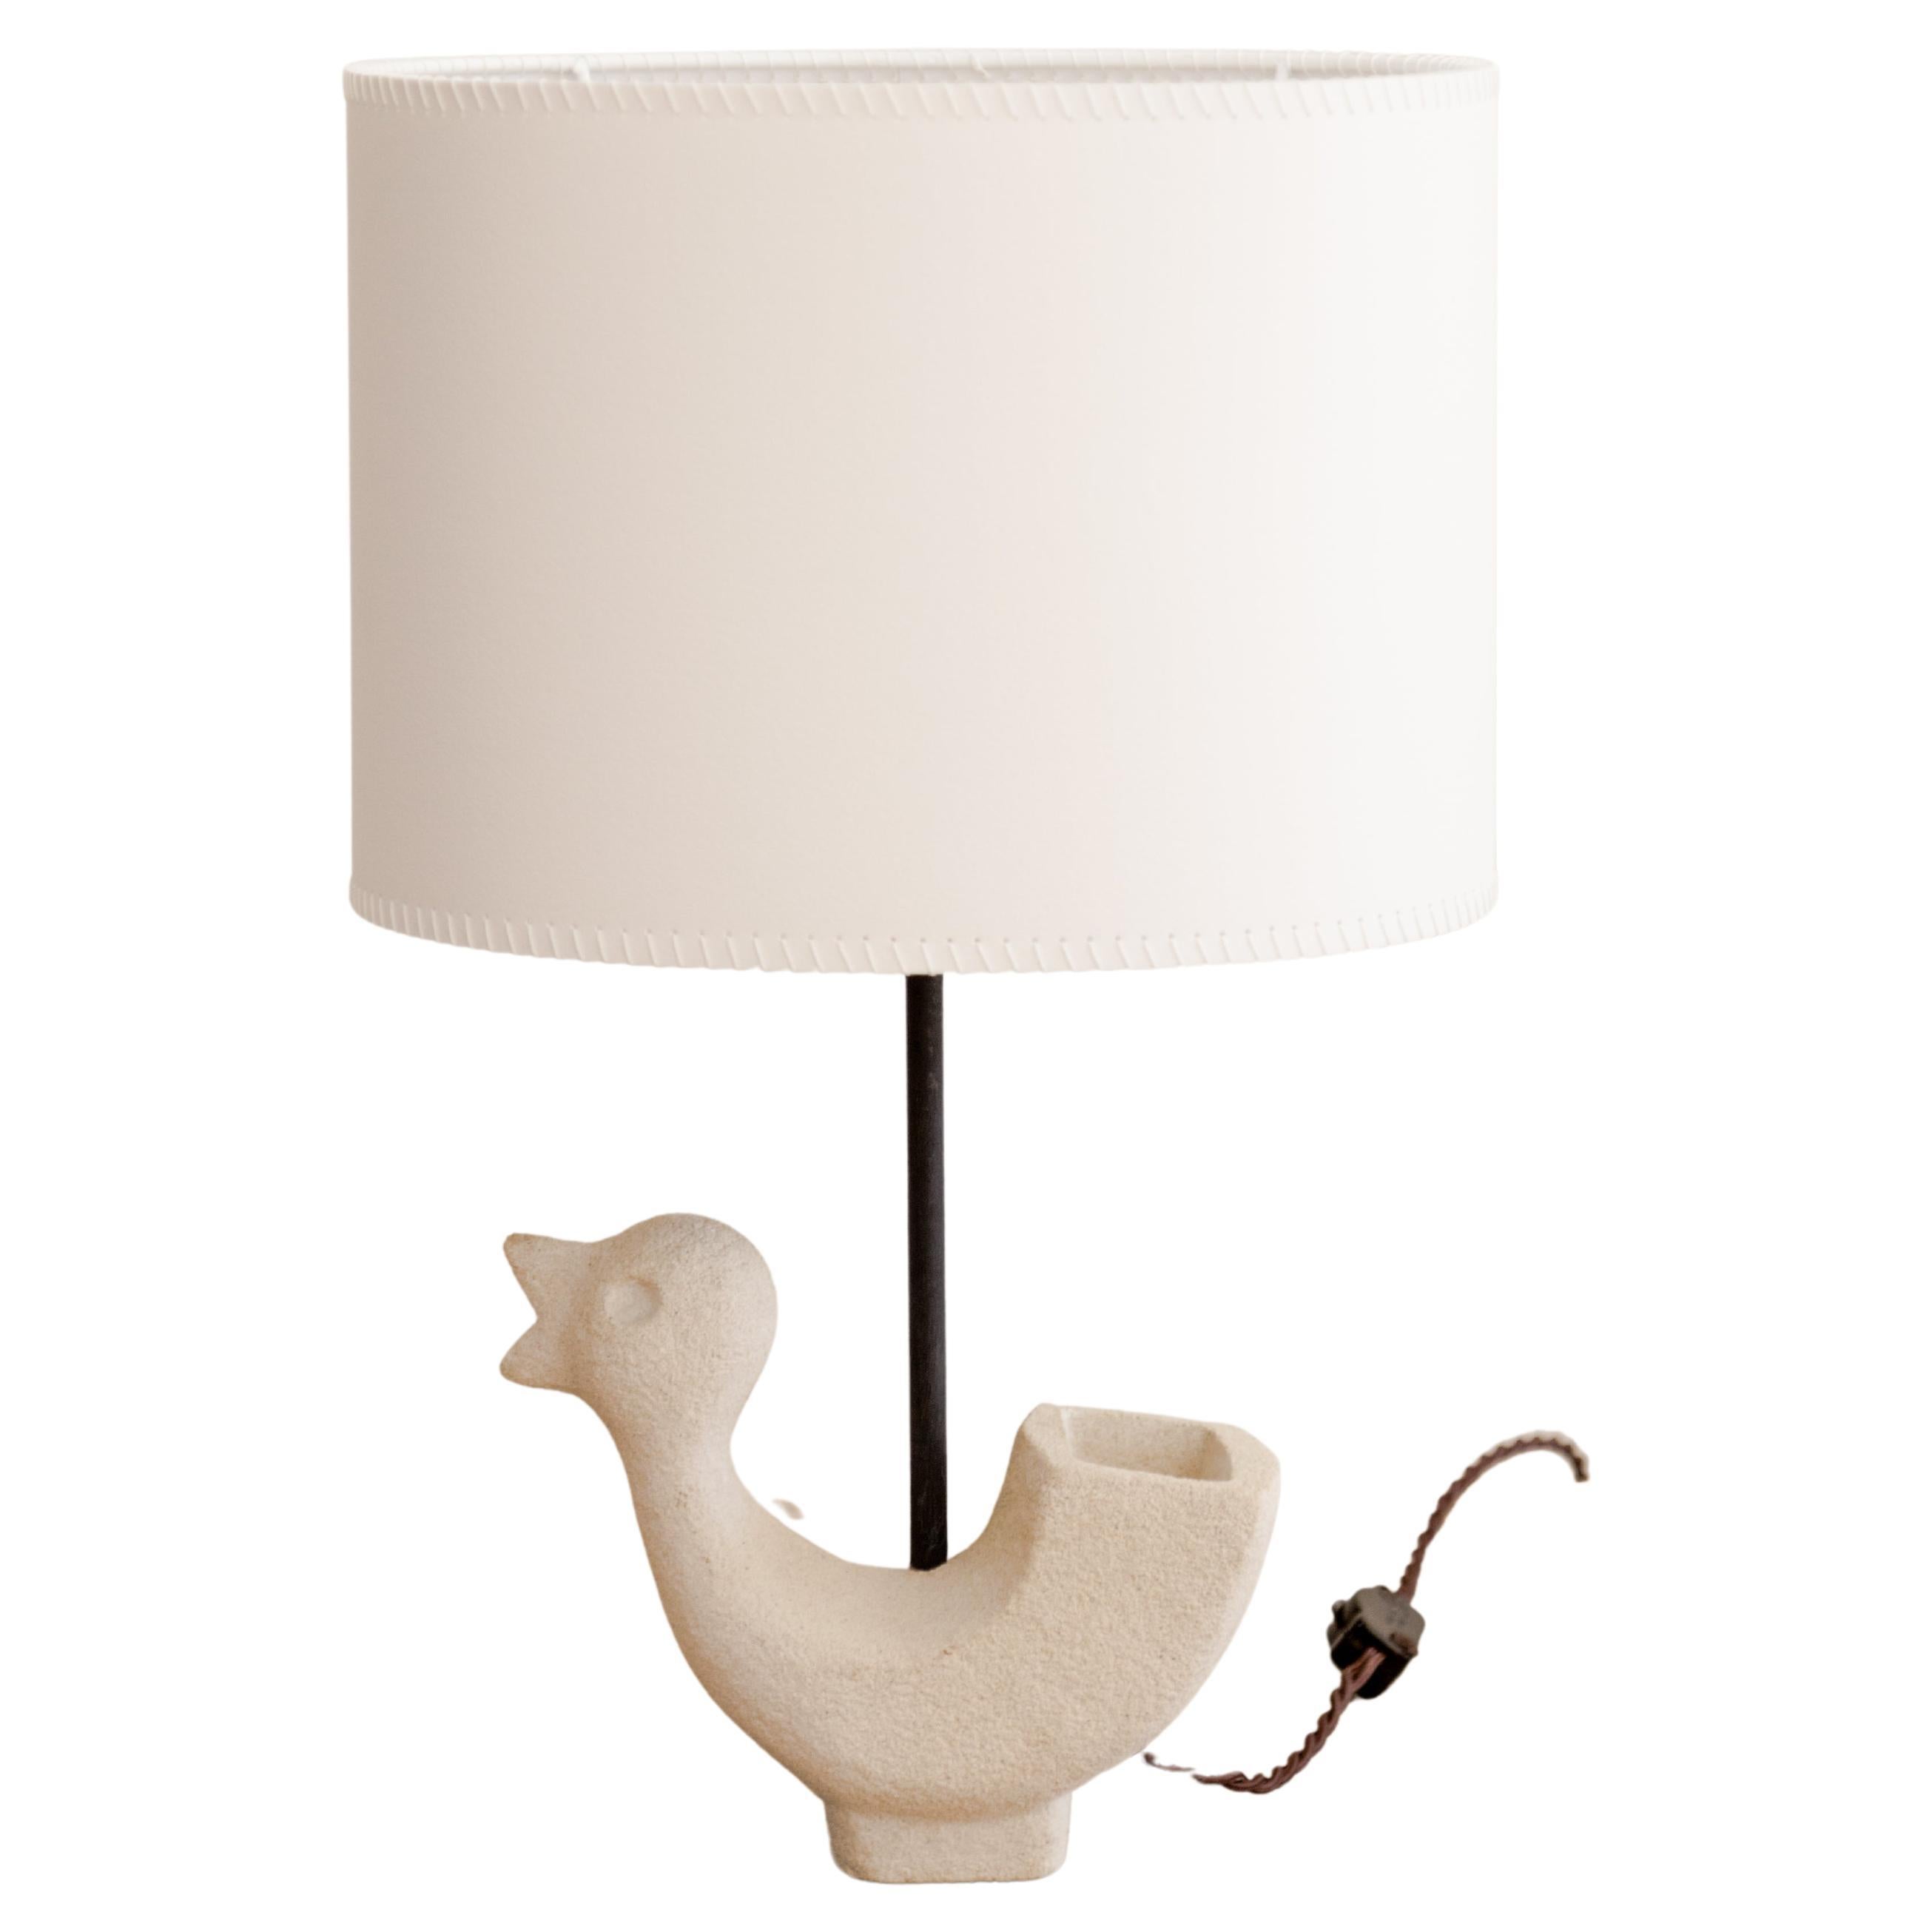 Whimsical Cast Stone Bird Chick Table Lamp